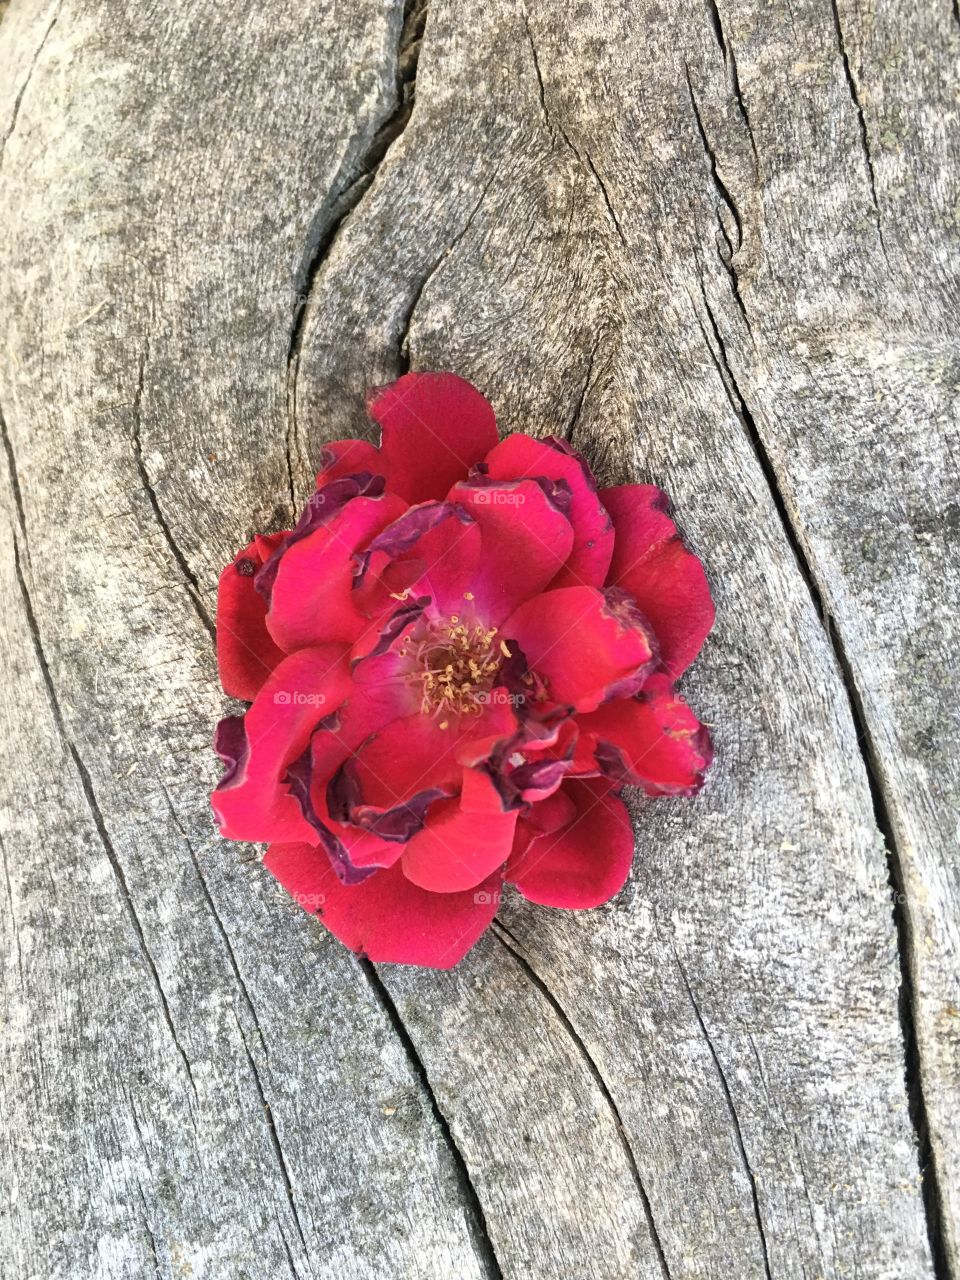 Rose and wood